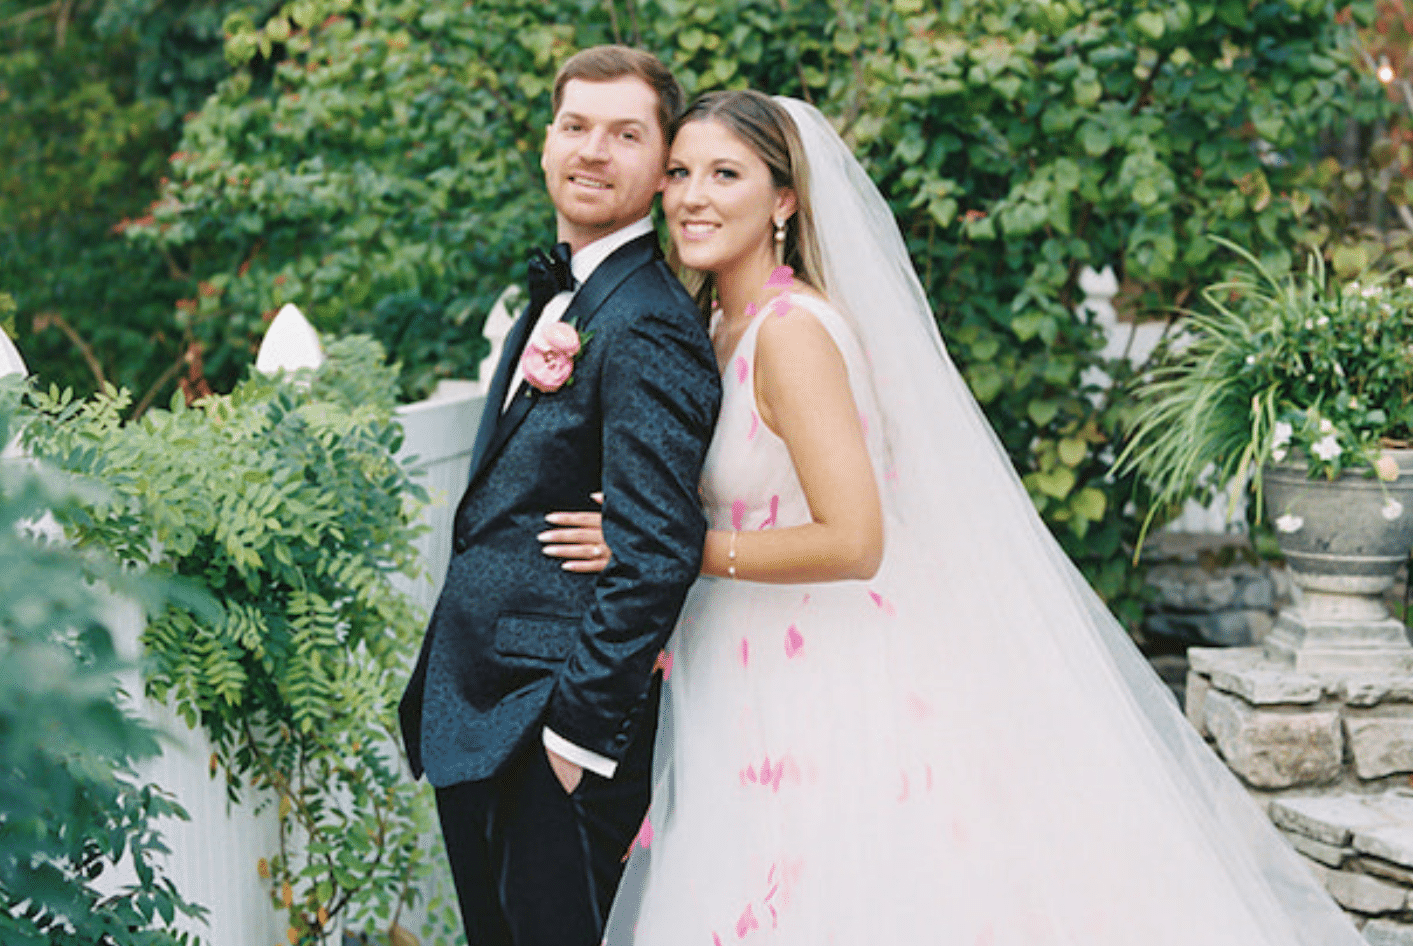 A Whimsical Garden Wedding In Shades of Pink | October 8